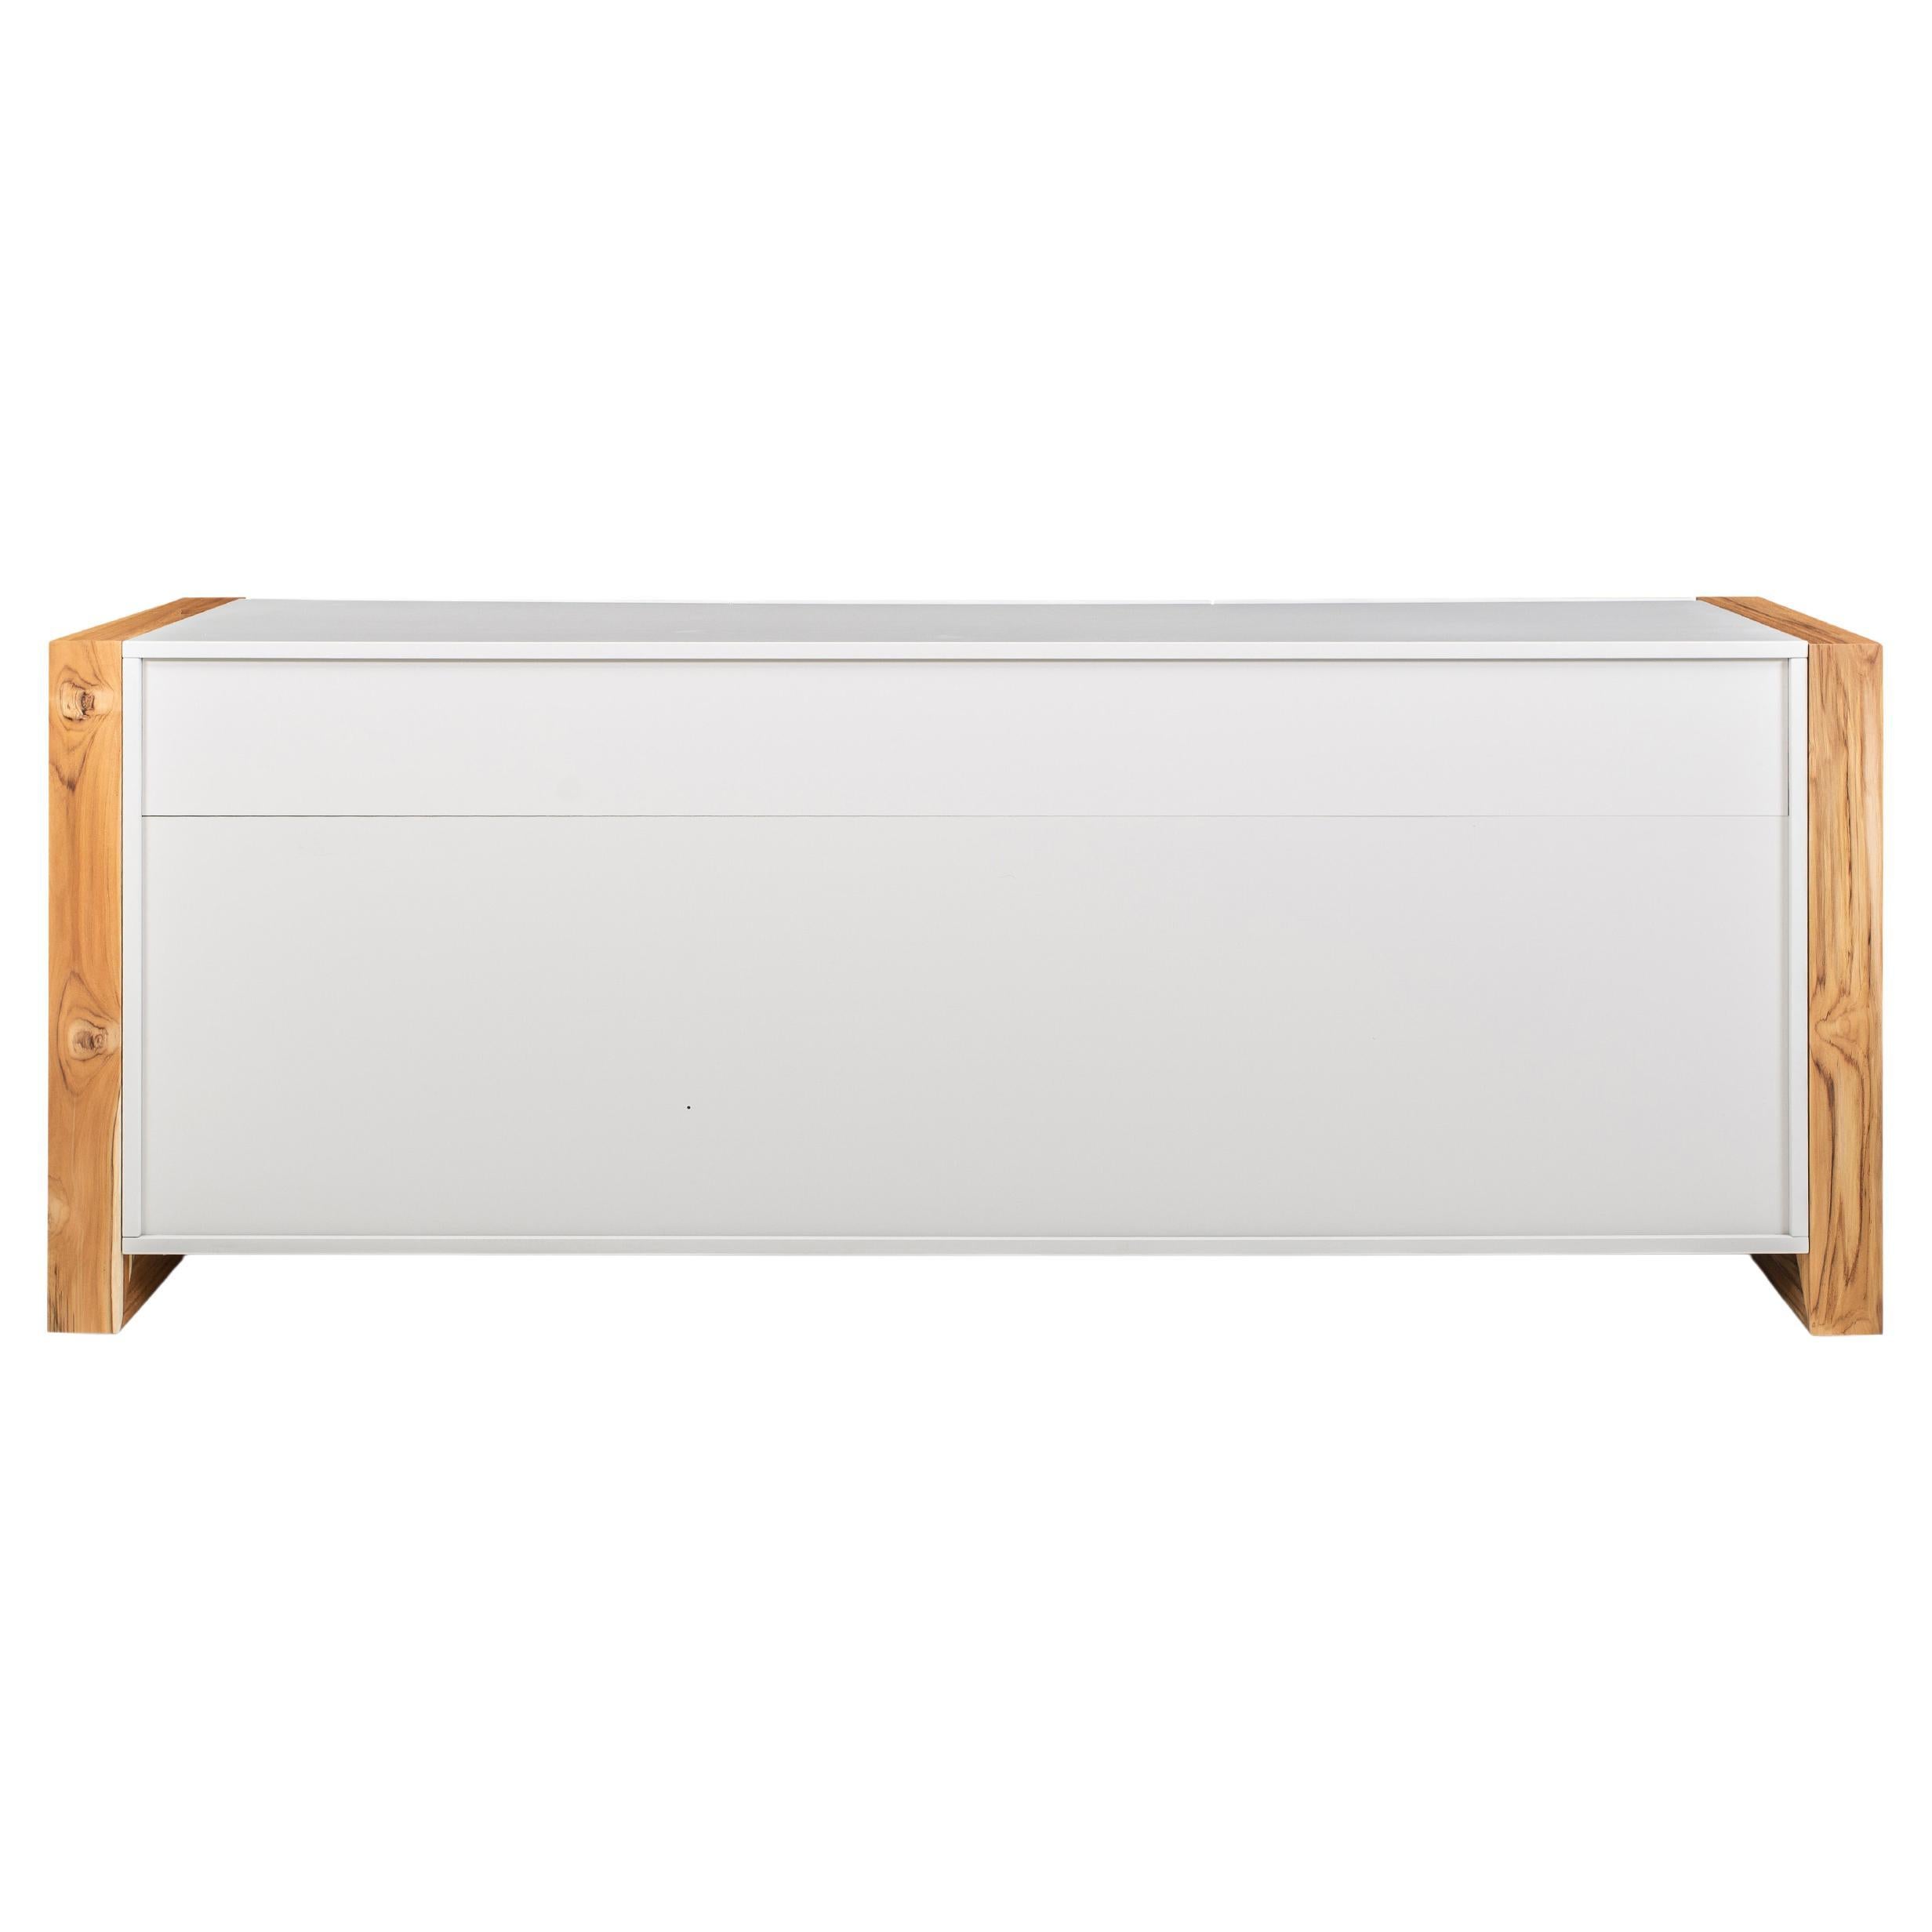 The Masp sideboard in an off-white finish and teak end frames, was created by our Uultis Design team for the purpose of storage since it is a piece that can be used for the dining room space. This beautiful sideboard comes in an off-white color